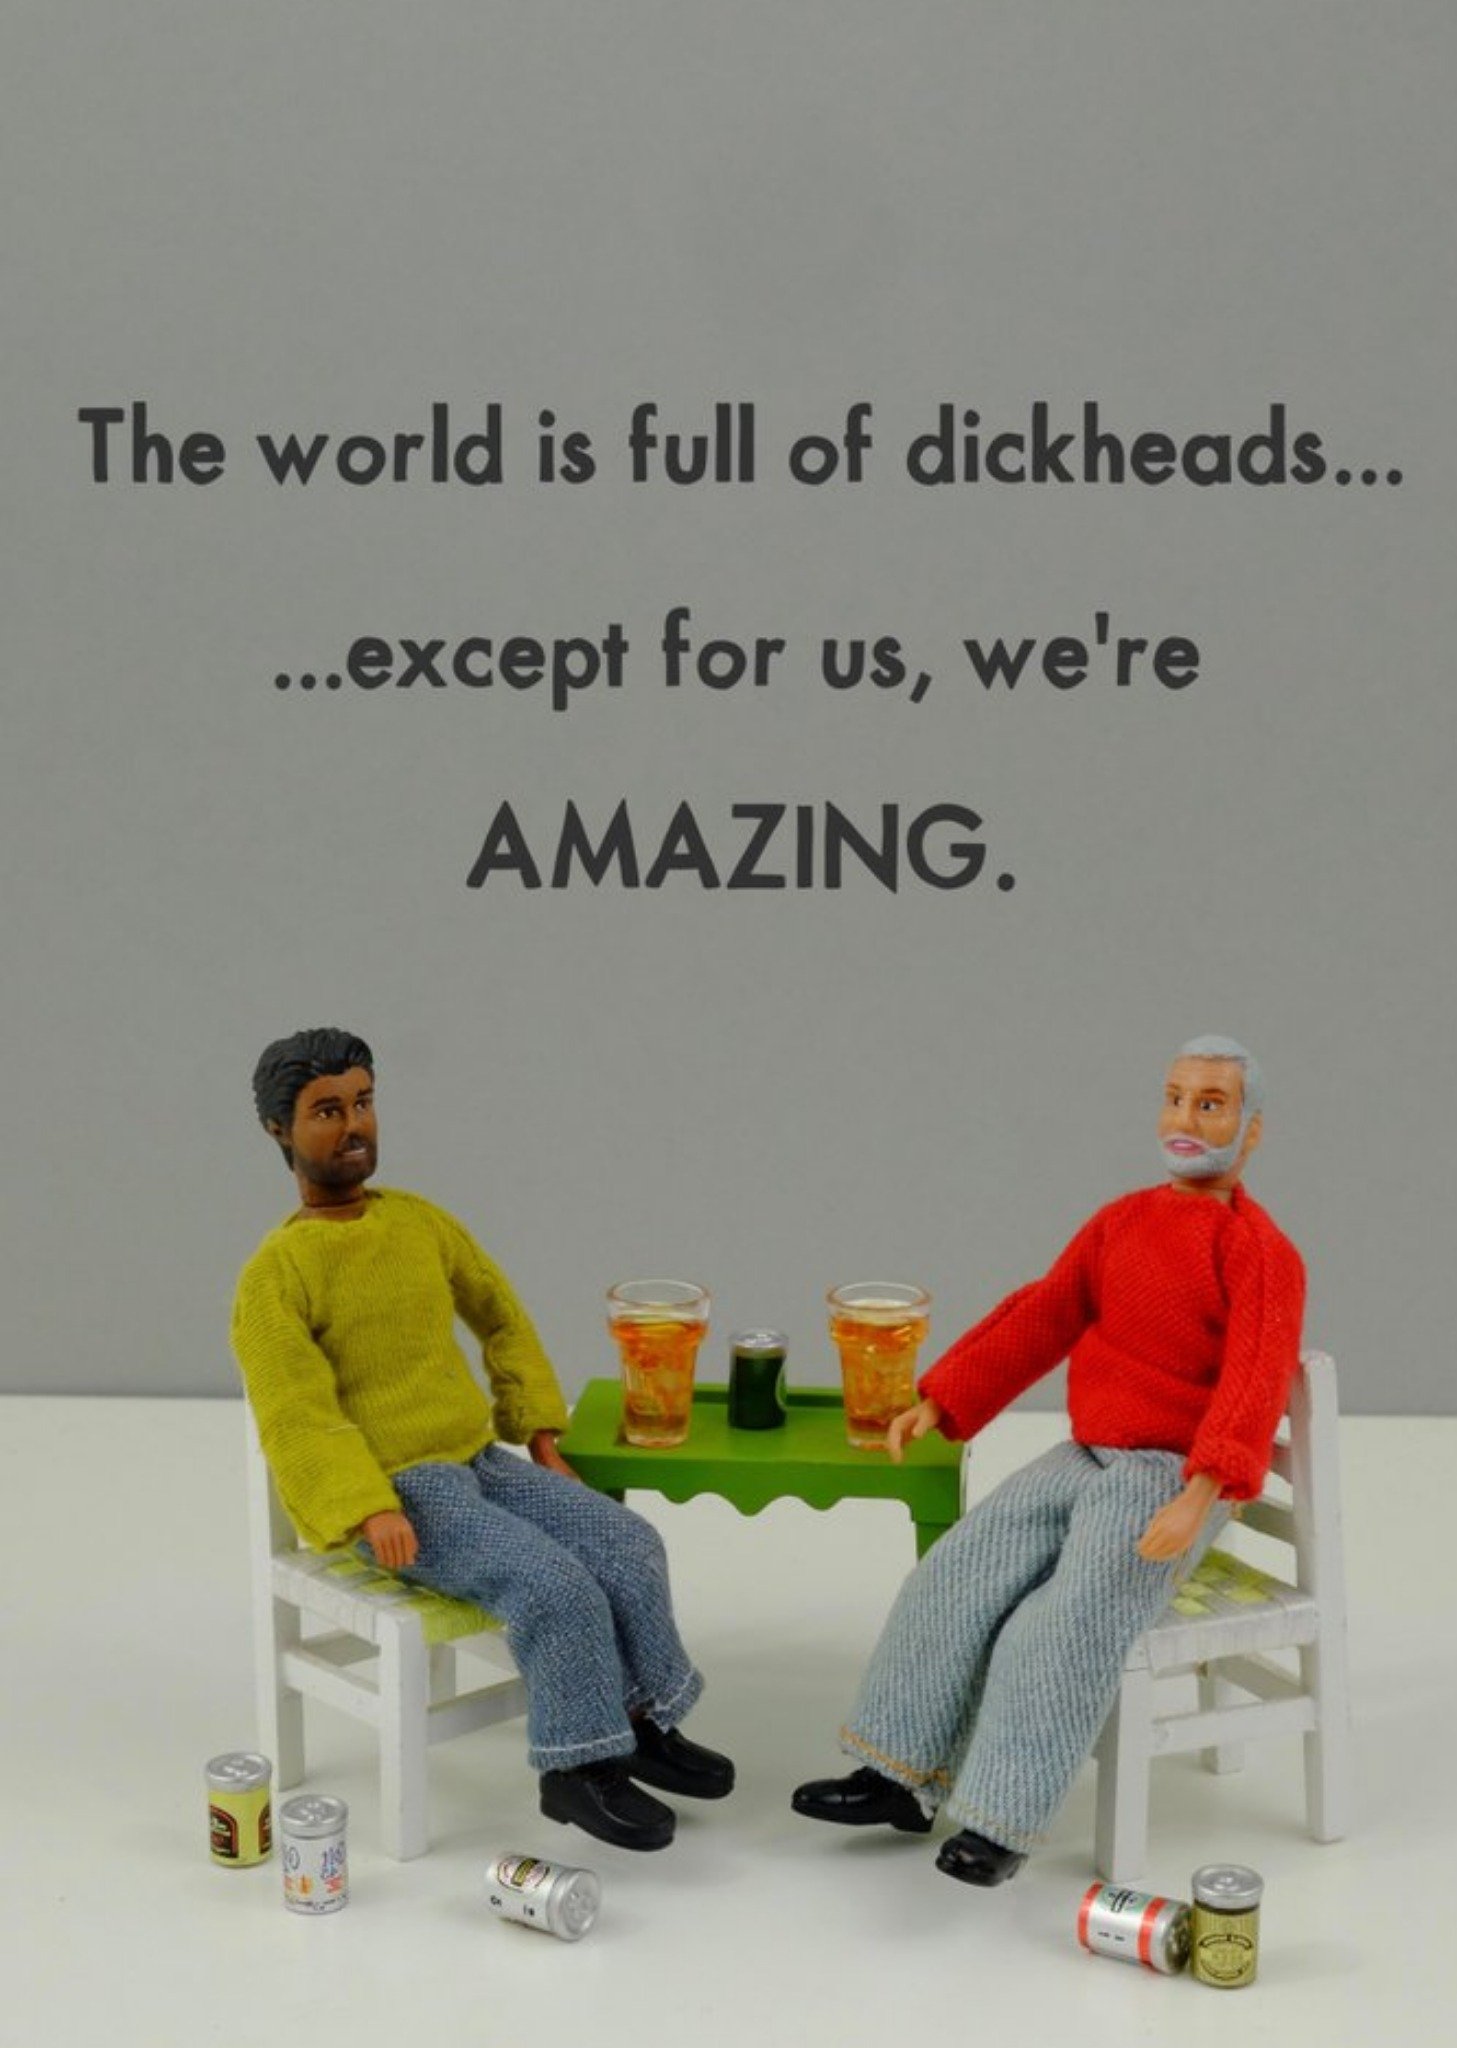 Bold And Bright Funny Photographic Image Of Two Male Dolls Drink Beer The World Is Full Of Dickheads